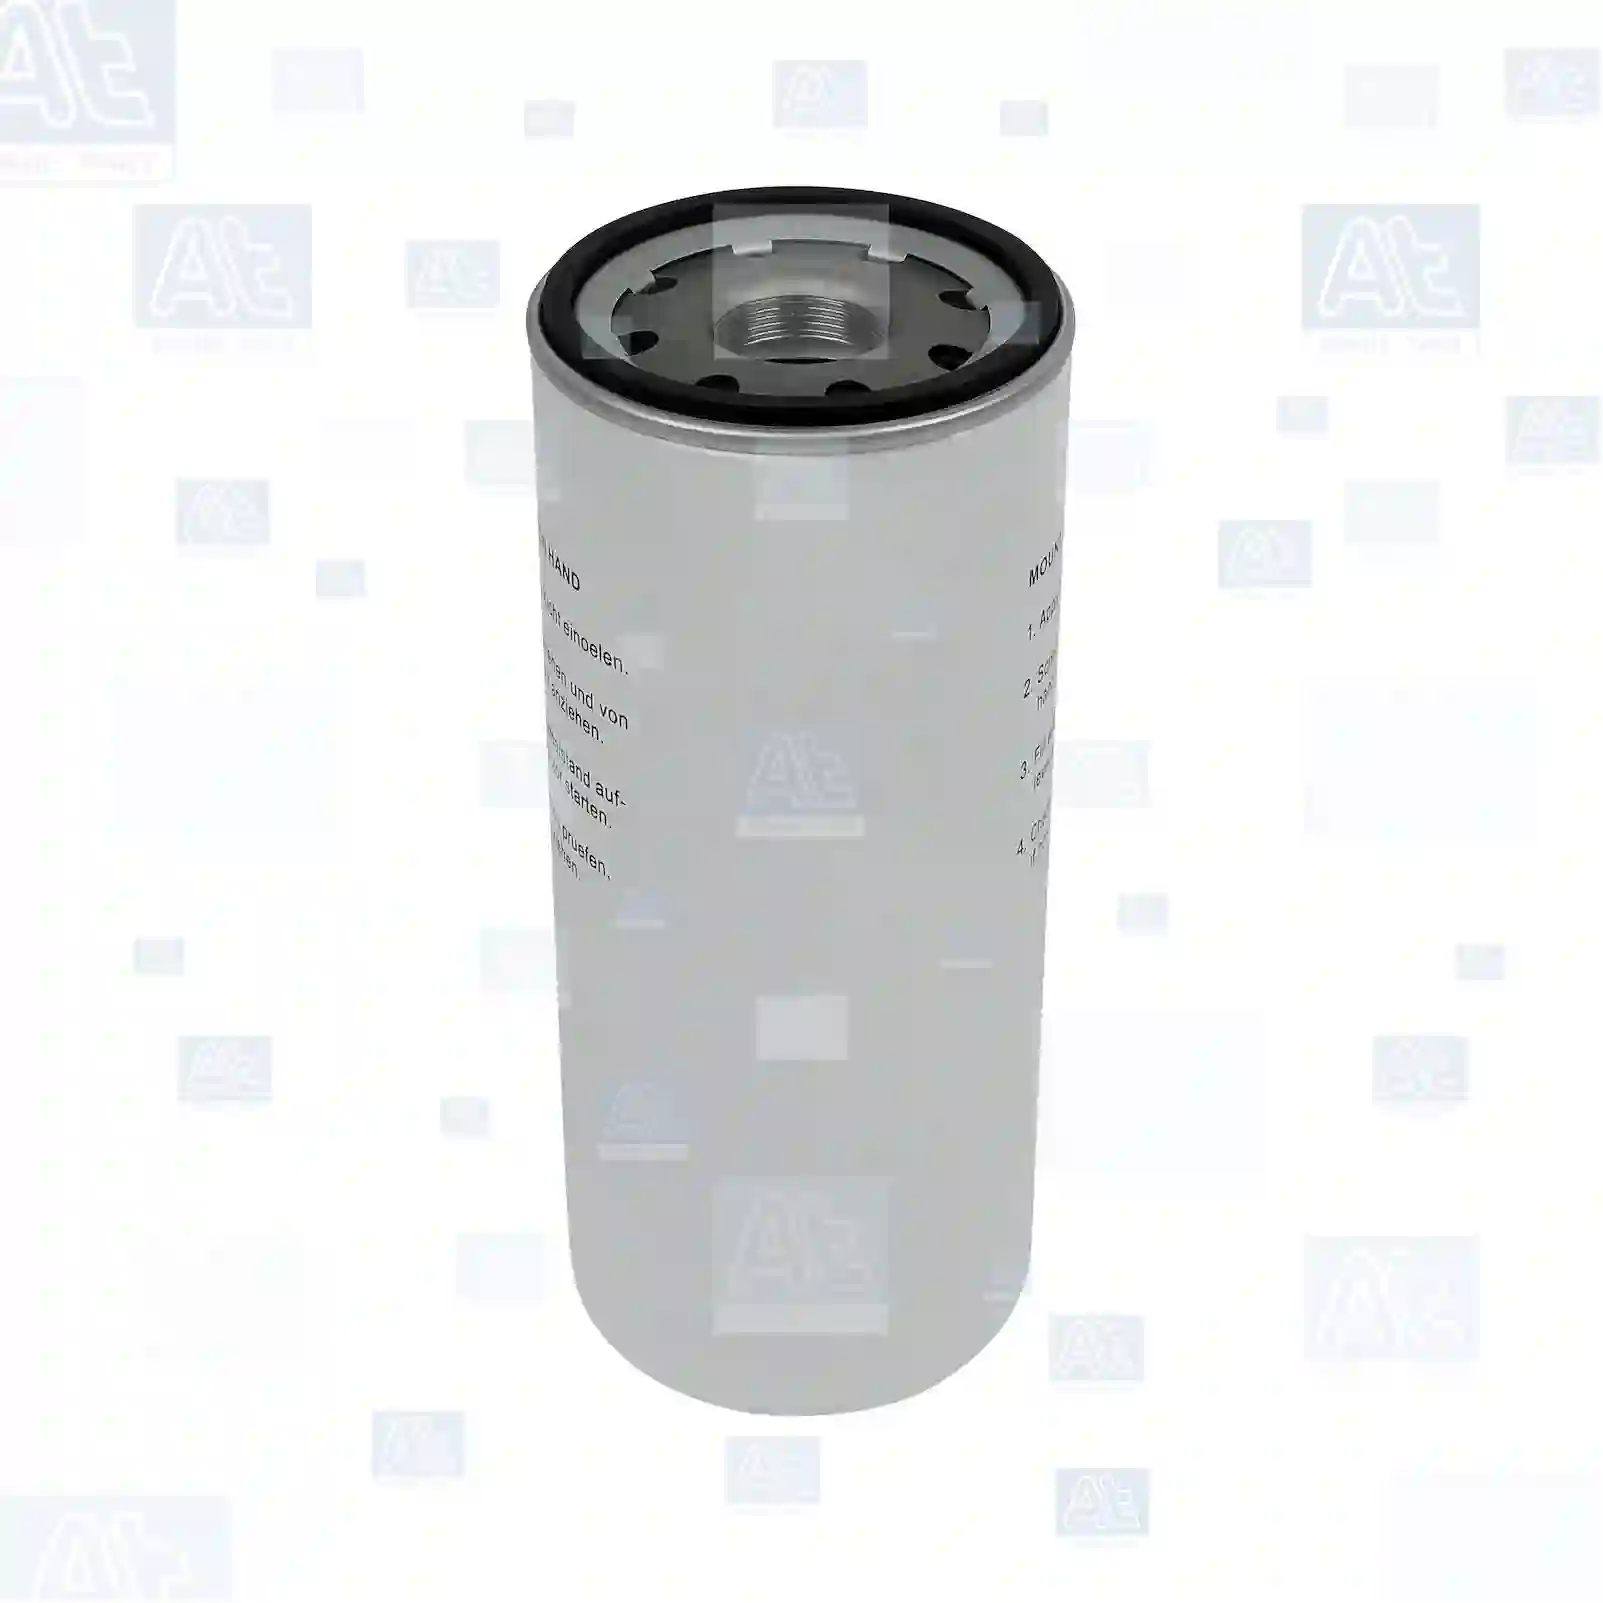 Oil filter, at no 77700267, oem no: 4322701, 74322701, 11421763296, 1212621H1, 150521, 3136406R91, 3313283, 572498C1, 901158T1, 905411880008, K150521KC, PO015521KC, 1W-4845, 1W-8845, 226-6554, 229-6554, 3I-1206, 7C-4228, 9Y-4468, 9Y-4524, 0013022760, 0013022761, 3021658, 3303242, 3304232, 3309637, 3312287, 3313283, 3313284, 3313289, 3889311, BBU8333, BBU9687, 23530413, 00548974, 692306, 901000, 01181749, 01183574, 605411880008, 1356344, C3304232, 0746870, 04322701, 61259040, 700703332, 71455205, 73124135, 74322701, 76604059, Y03422604, Y03426604, Y03723200, Y08552602, 3313283, 57124, 6130864, ABPN10GLF777, DNP550777, 15587320, 2054371, 2054377, 23518672, 25011187, 25011188, 25177018, 5266845, 15587320, 2054371, 2054377, 23518672, 25011187, 25011188, 5266845, 9975220, 194939128, 156071420, 156071421, 156071440, 156071760, 156071790, 156072040, 1878116392, 4175913, 41759131, 4204048, 42040481, 4285964, 42859641, 4371313, 4379562, 4380540, 4429727, 4448735, 4470167, 71455205, 76590121, AR98330, H3754002100, L4175913, RE42051, 1212621H1, 572498C1, 1-13240067-0, 1-13240103-0, 1-13240131-0, 1-13240163-0, 1-13240163-2, 1-13240209-0, 2-90654830-0, 5000812484, AR21748, AR98330, PMLF777, RE21748, RE42051, KW77, KW777, L275, 5604365, 20843764, 20845764, 21707135, 2191P550425, 2191P550777, 55505504007, 3632567M1, 771308M1, 771308M2, 3754002100, 3754002100D, 3754002100E, ME034879, 00057124, 00V57124, 01350561, 86546626, 52211-70573, 52217-06532, 1220526, 1220703, 1220777, 122077700, PB777, B1350561, K150521, K850588, V850559, 5000682148, 5000812484, 5001846647, 7420430751, 7420541379, 7421561284, 7423114217, LUS3921, 5502096, 1216400531, 836340713, 15267514, 152009Z00B, 5221170573, 5221706532, 119962280, 11996228, 119962280, 129694576, 12978467, 21170573, 21707132, 27872, 3130924, 3131750, 40412306, 4041330, 40413306, 471392, 4713921, 471393, 4713982, 477556, 4775565, 60477556, 8121109, 85114048, 963023, 991213283, 85660, 172015777, ZG01699-0008 At Spare Part | Engine, Accelerator Pedal, Camshaft, Connecting Rod, Crankcase, Crankshaft, Cylinder Head, Engine Suspension Mountings, Exhaust Manifold, Exhaust Gas Recirculation, Filter Kits, Flywheel Housing, General Overhaul Kits, Engine, Intake Manifold, Oil Cleaner, Oil Cooler, Oil Filter, Oil Pump, Oil Sump, Piston & Liner, Sensor & Switch, Timing Case, Turbocharger, Cooling System, Belt Tensioner, Coolant Filter, Coolant Pipe, Corrosion Prevention Agent, Drive, Expansion Tank, Fan, Intercooler, Monitors & Gauges, Radiator, Thermostat, V-Belt / Timing belt, Water Pump, Fuel System, Electronical Injector Unit, Feed Pump, Fuel Filter, cpl., Fuel Gauge Sender,  Fuel Line, Fuel Pump, Fuel Tank, Injection Line Kit, Injection Pump, Exhaust System, Clutch & Pedal, Gearbox, Propeller Shaft, Axles, Brake System, Hubs & Wheels, Suspension, Leaf Spring, Universal Parts / Accessories, Steering, Electrical System, Cabin Oil filter, at no 77700267, oem no: 4322701, 74322701, 11421763296, 1212621H1, 150521, 3136406R91, 3313283, 572498C1, 901158T1, 905411880008, K150521KC, PO015521KC, 1W-4845, 1W-8845, 226-6554, 229-6554, 3I-1206, 7C-4228, 9Y-4468, 9Y-4524, 0013022760, 0013022761, 3021658, 3303242, 3304232, 3309637, 3312287, 3313283, 3313284, 3313289, 3889311, BBU8333, BBU9687, 23530413, 00548974, 692306, 901000, 01181749, 01183574, 605411880008, 1356344, C3304232, 0746870, 04322701, 61259040, 700703332, 71455205, 73124135, 74322701, 76604059, Y03422604, Y03426604, Y03723200, Y08552602, 3313283, 57124, 6130864, ABPN10GLF777, DNP550777, 15587320, 2054371, 2054377, 23518672, 25011187, 25011188, 25177018, 5266845, 15587320, 2054371, 2054377, 23518672, 25011187, 25011188, 5266845, 9975220, 194939128, 156071420, 156071421, 156071440, 156071760, 156071790, 156072040, 1878116392, 4175913, 41759131, 4204048, 42040481, 4285964, 42859641, 4371313, 4379562, 4380540, 4429727, 4448735, 4470167, 71455205, 76590121, AR98330, H3754002100, L4175913, RE42051, 1212621H1, 572498C1, 1-13240067-0, 1-13240103-0, 1-13240131-0, 1-13240163-0, 1-13240163-2, 1-13240209-0, 2-90654830-0, 5000812484, AR21748, AR98330, PMLF777, RE21748, RE42051, KW77, KW777, L275, 5604365, 20843764, 20845764, 21707135, 2191P550425, 2191P550777, 55505504007, 3632567M1, 771308M1, 771308M2, 3754002100, 3754002100D, 3754002100E, ME034879, 00057124, 00V57124, 01350561, 86546626, 52211-70573, 52217-06532, 1220526, 1220703, 1220777, 122077700, PB777, B1350561, K150521, K850588, V850559, 5000682148, 5000812484, 5001846647, 7420430751, 7420541379, 7421561284, 7423114217, LUS3921, 5502096, 1216400531, 836340713, 15267514, 152009Z00B, 5221170573, 5221706532, 119962280, 11996228, 119962280, 129694576, 12978467, 21170573, 21707132, 27872, 3130924, 3131750, 40412306, 4041330, 40413306, 471392, 4713921, 471393, 4713982, 477556, 4775565, 60477556, 8121109, 85114048, 963023, 991213283, 85660, 172015777, ZG01699-0008 At Spare Part | Engine, Accelerator Pedal, Camshaft, Connecting Rod, Crankcase, Crankshaft, Cylinder Head, Engine Suspension Mountings, Exhaust Manifold, Exhaust Gas Recirculation, Filter Kits, Flywheel Housing, General Overhaul Kits, Engine, Intake Manifold, Oil Cleaner, Oil Cooler, Oil Filter, Oil Pump, Oil Sump, Piston & Liner, Sensor & Switch, Timing Case, Turbocharger, Cooling System, Belt Tensioner, Coolant Filter, Coolant Pipe, Corrosion Prevention Agent, Drive, Expansion Tank, Fan, Intercooler, Monitors & Gauges, Radiator, Thermostat, V-Belt / Timing belt, Water Pump, Fuel System, Electronical Injector Unit, Feed Pump, Fuel Filter, cpl., Fuel Gauge Sender,  Fuel Line, Fuel Pump, Fuel Tank, Injection Line Kit, Injection Pump, Exhaust System, Clutch & Pedal, Gearbox, Propeller Shaft, Axles, Brake System, Hubs & Wheels, Suspension, Leaf Spring, Universal Parts / Accessories, Steering, Electrical System, Cabin